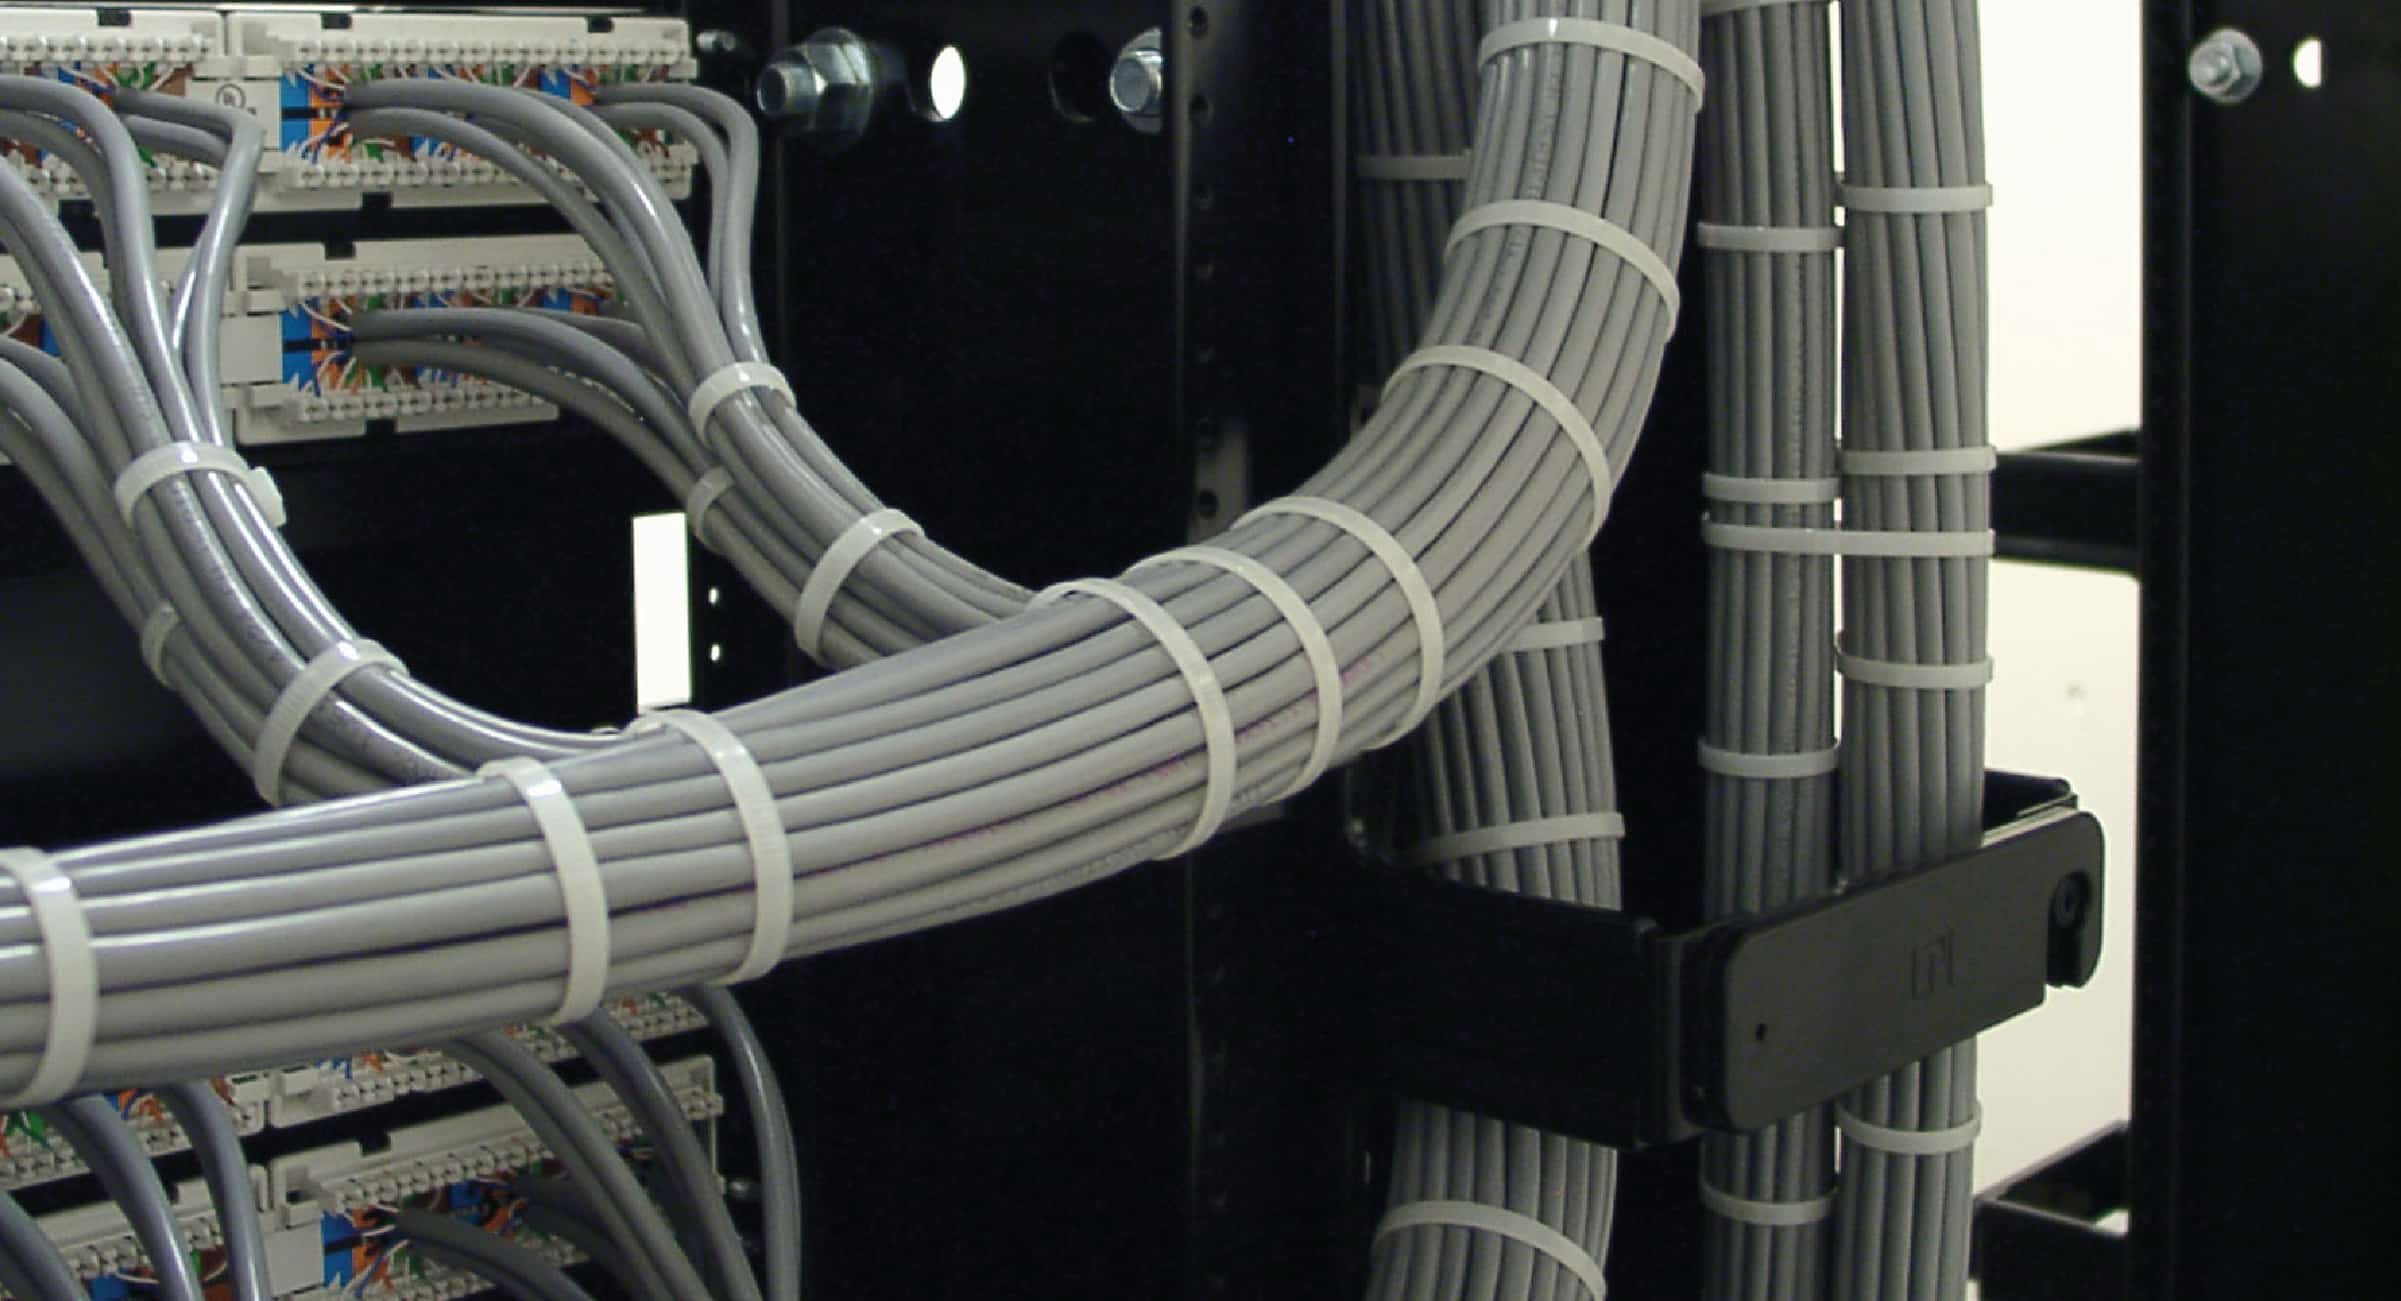 Building Networks Cable Management Solutions